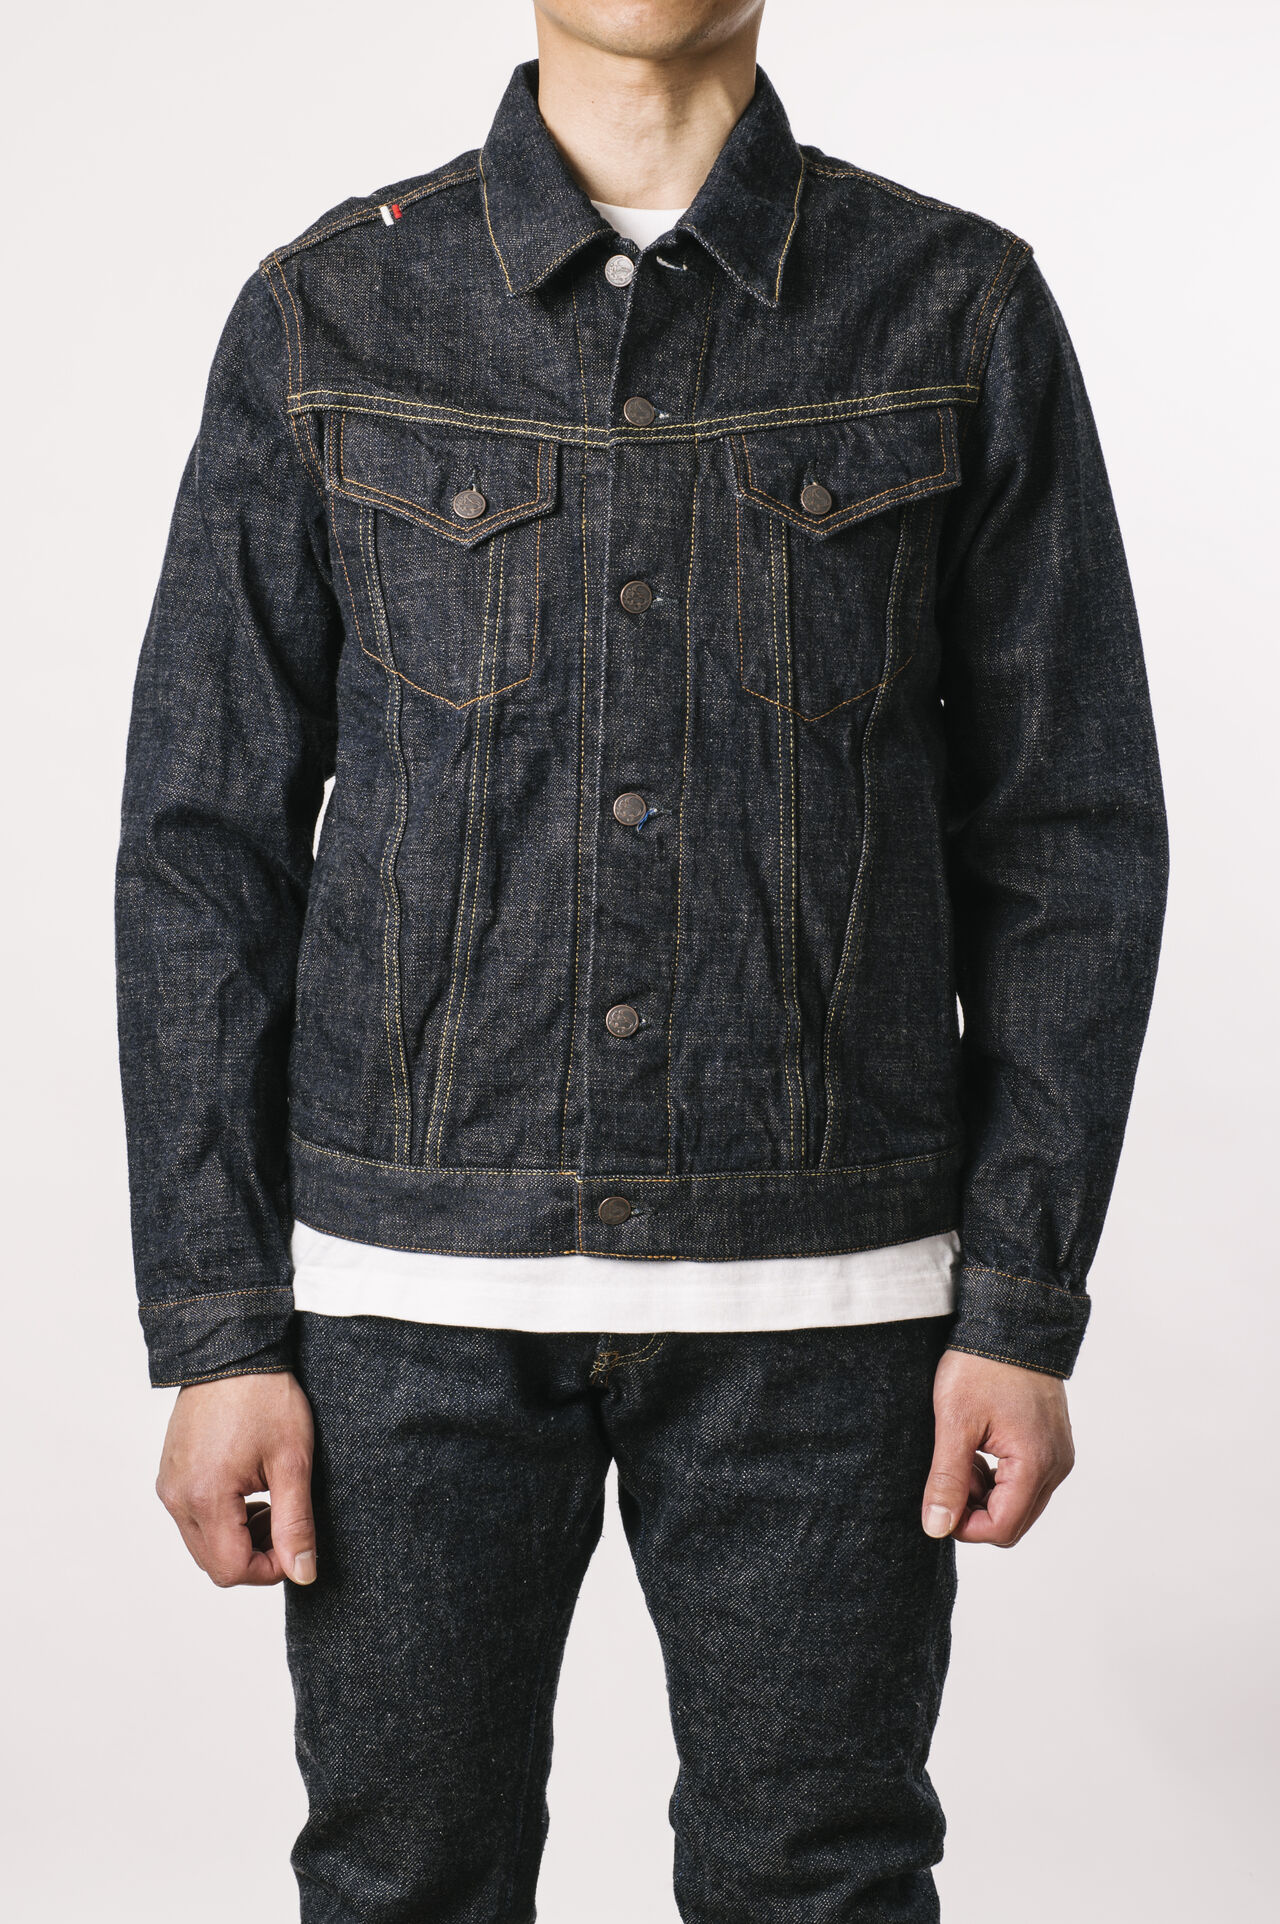 ZBJKT3 15oz "Zetto B" 3rd Type Jacket with Handwarmers,, large image number 0